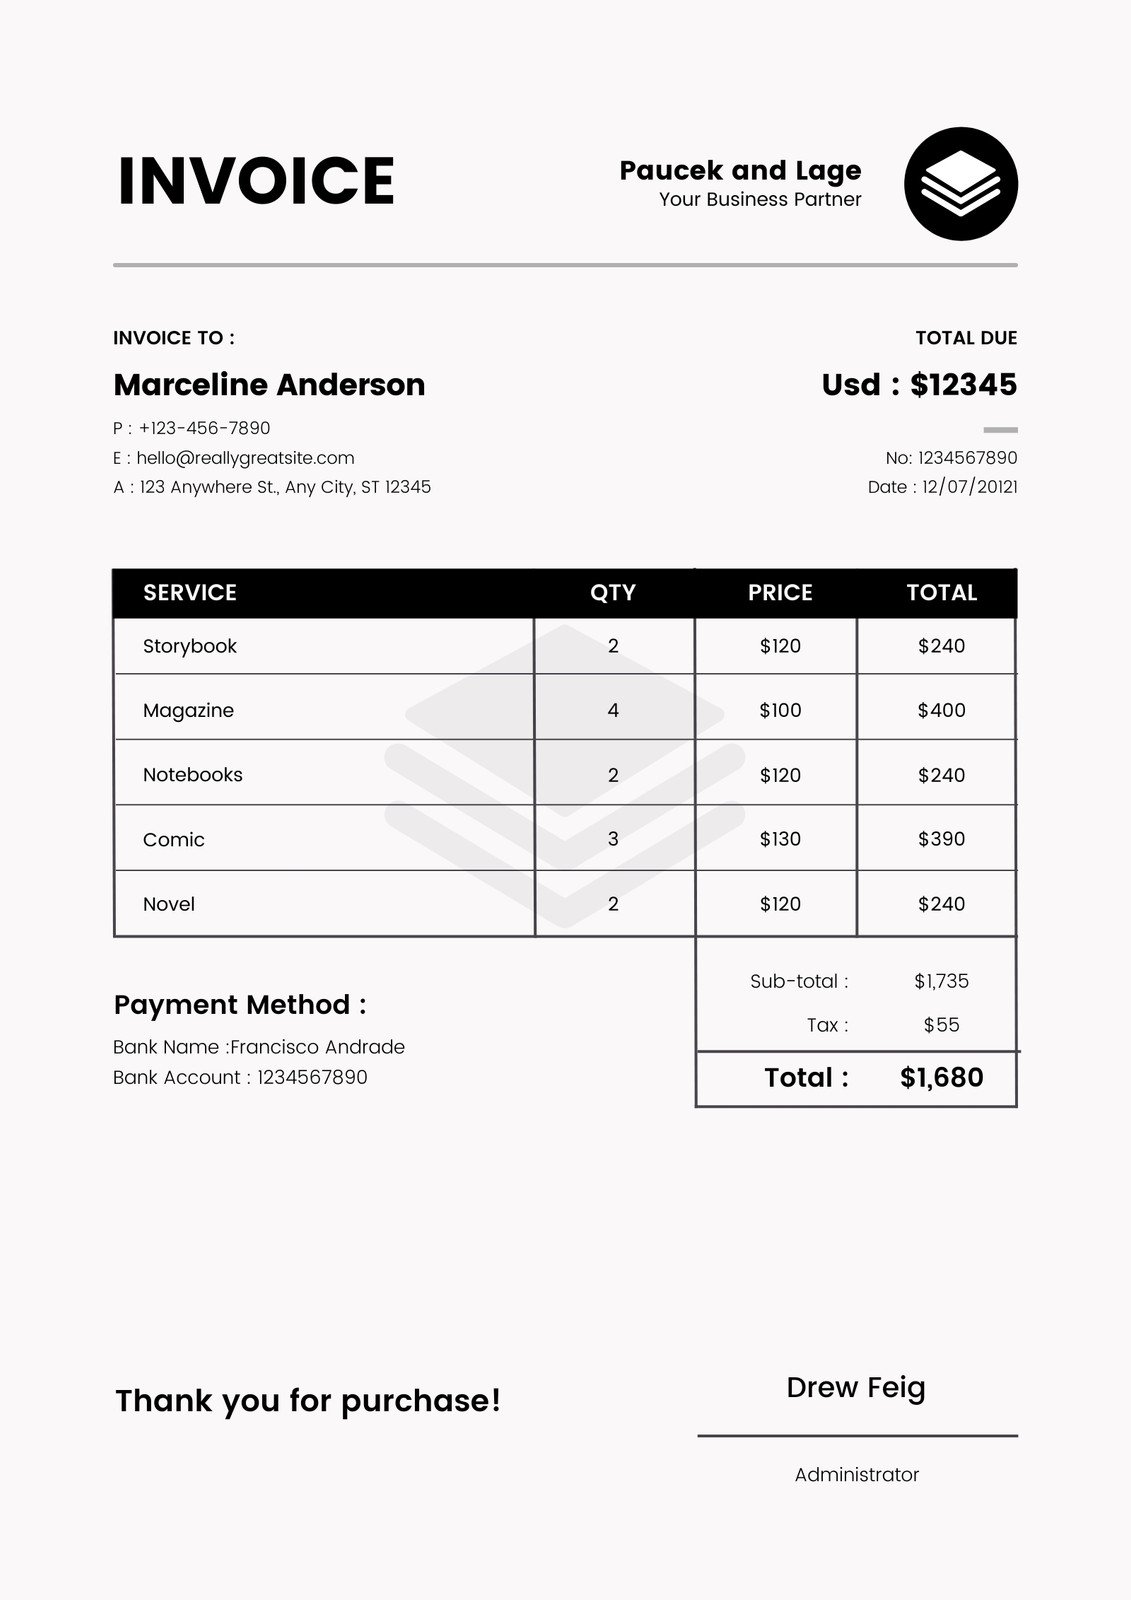 Free, printable, professional invoice templates to customize | Canva